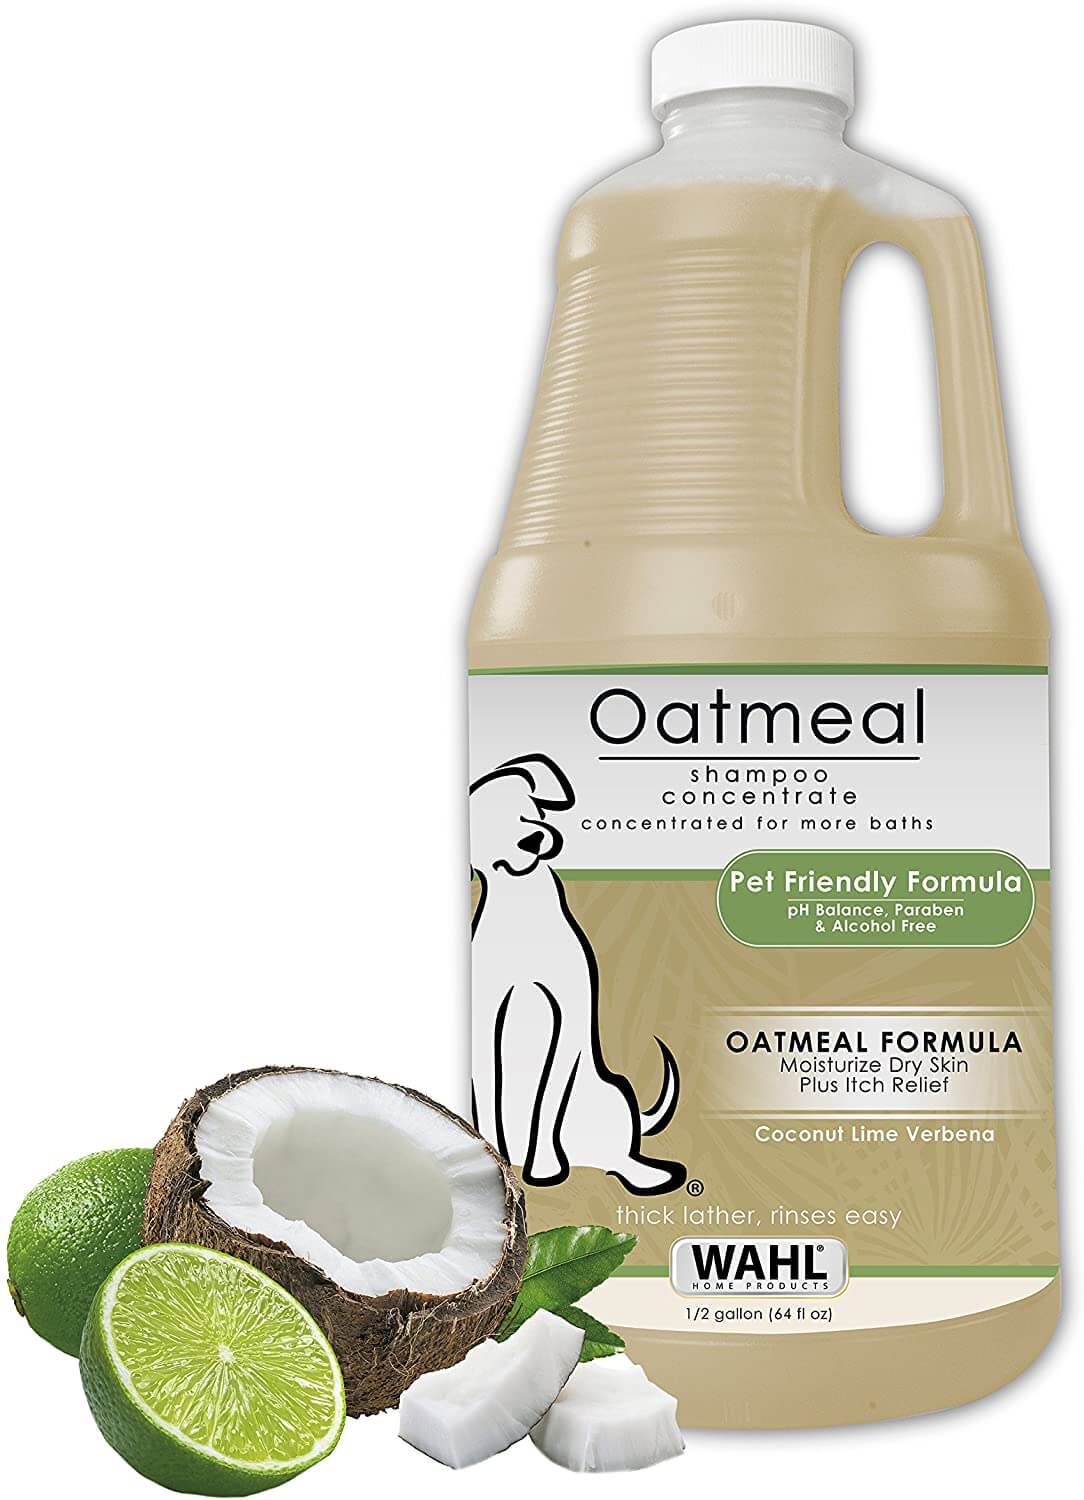 WAHL Dry Skin & Itch Relief Pet Shampoo